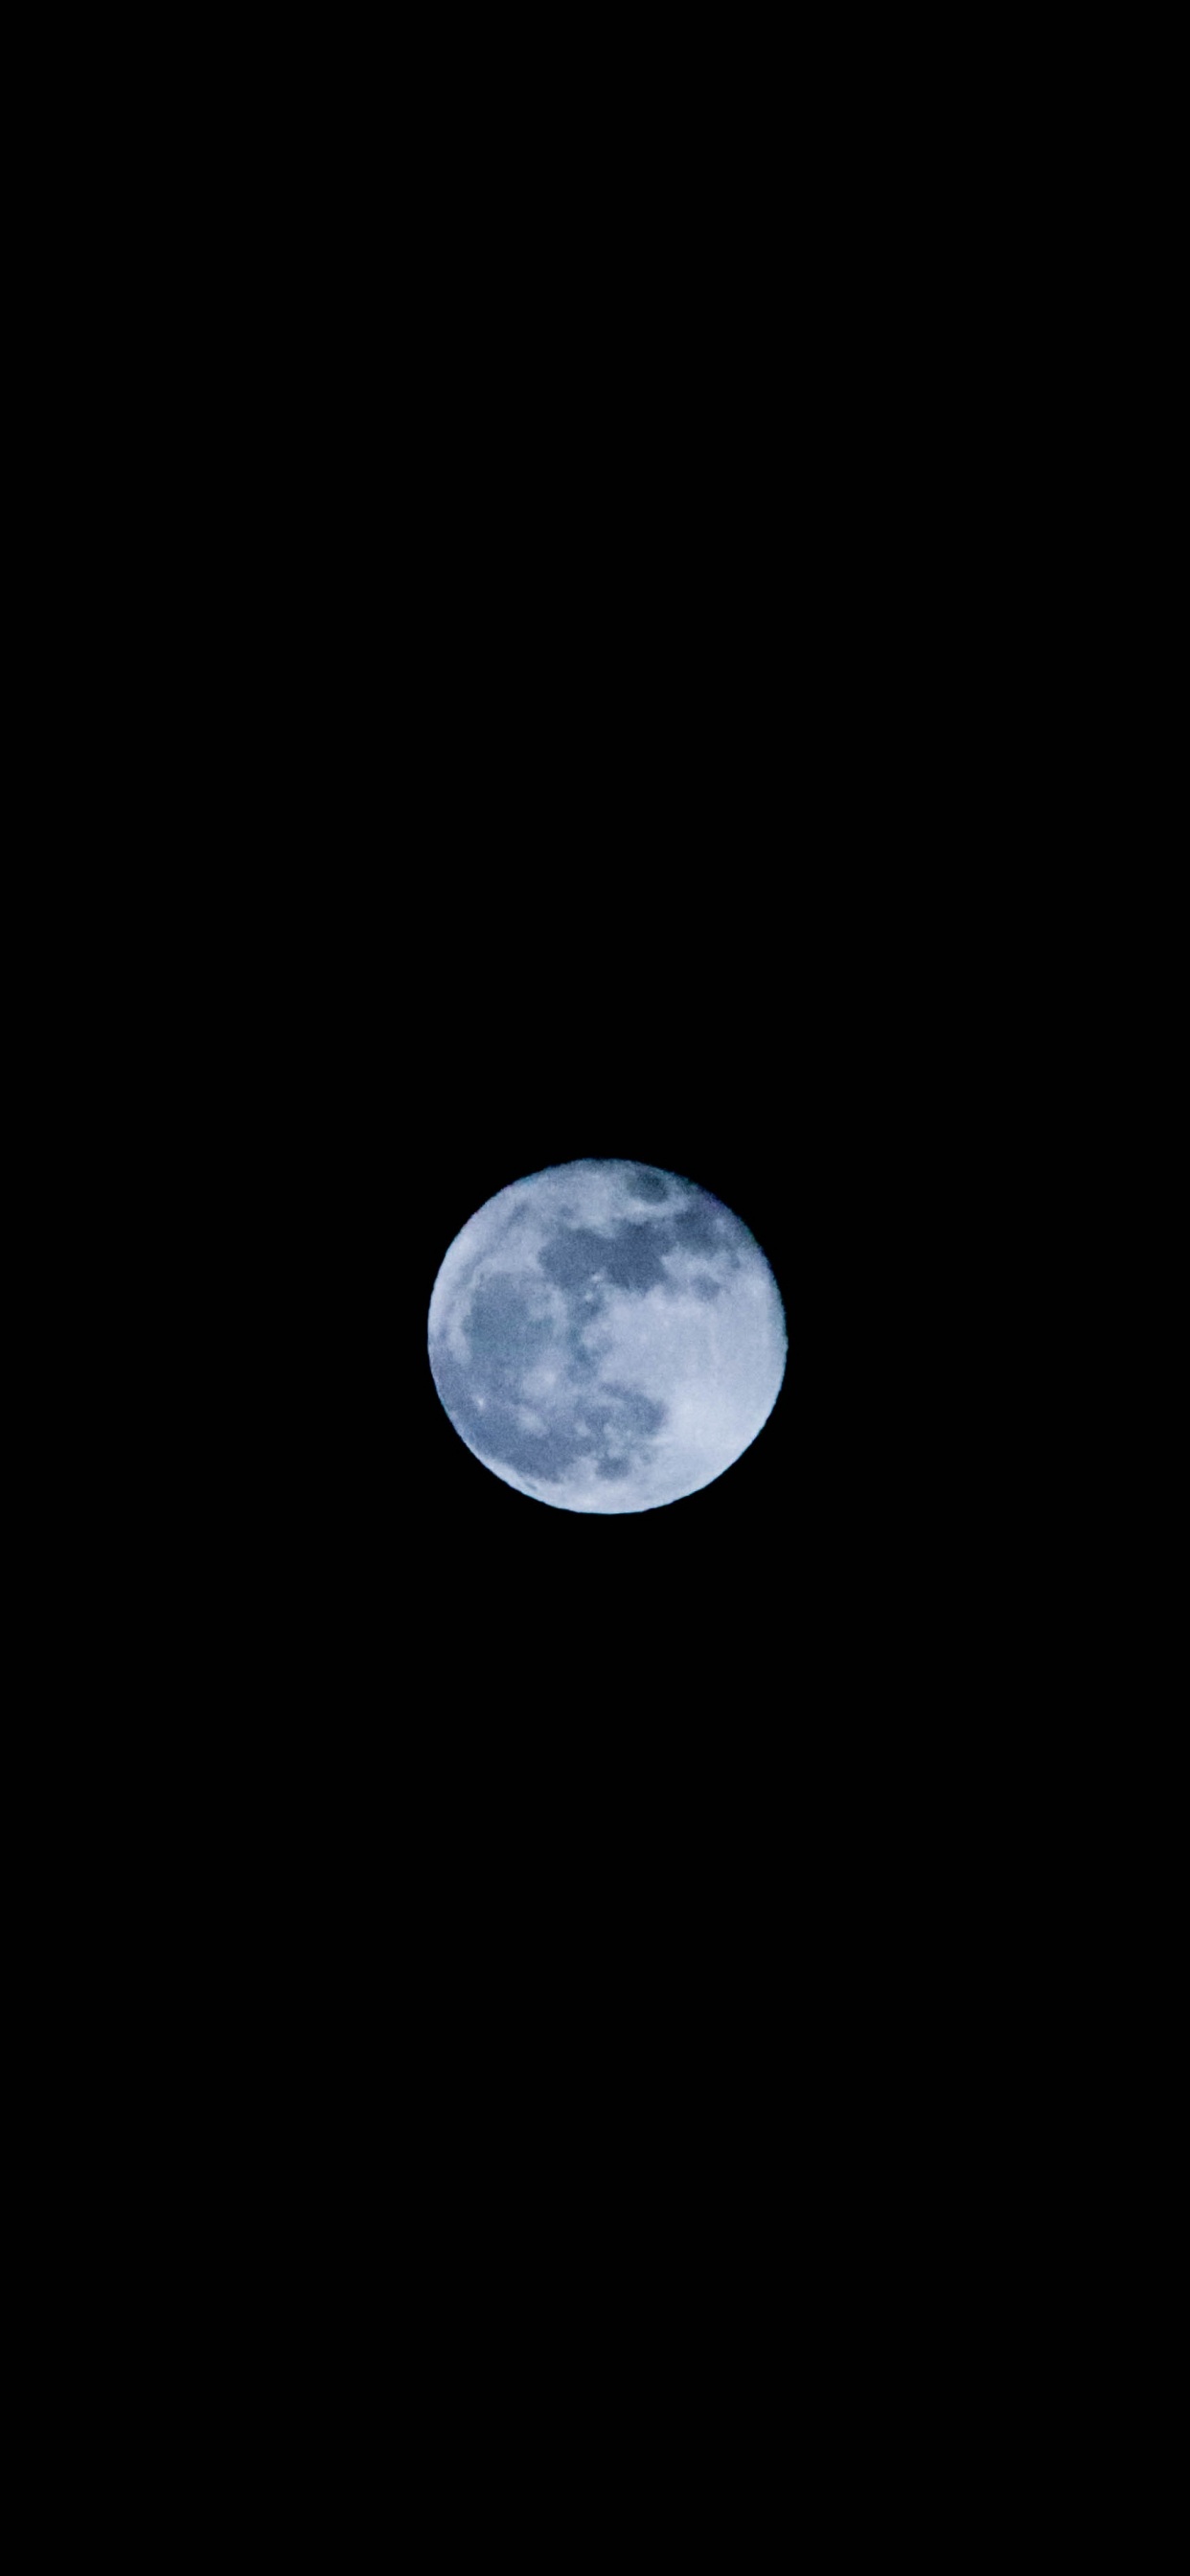 Full Moon in The Sky. Wallpaper in 1242x2688 Resolution